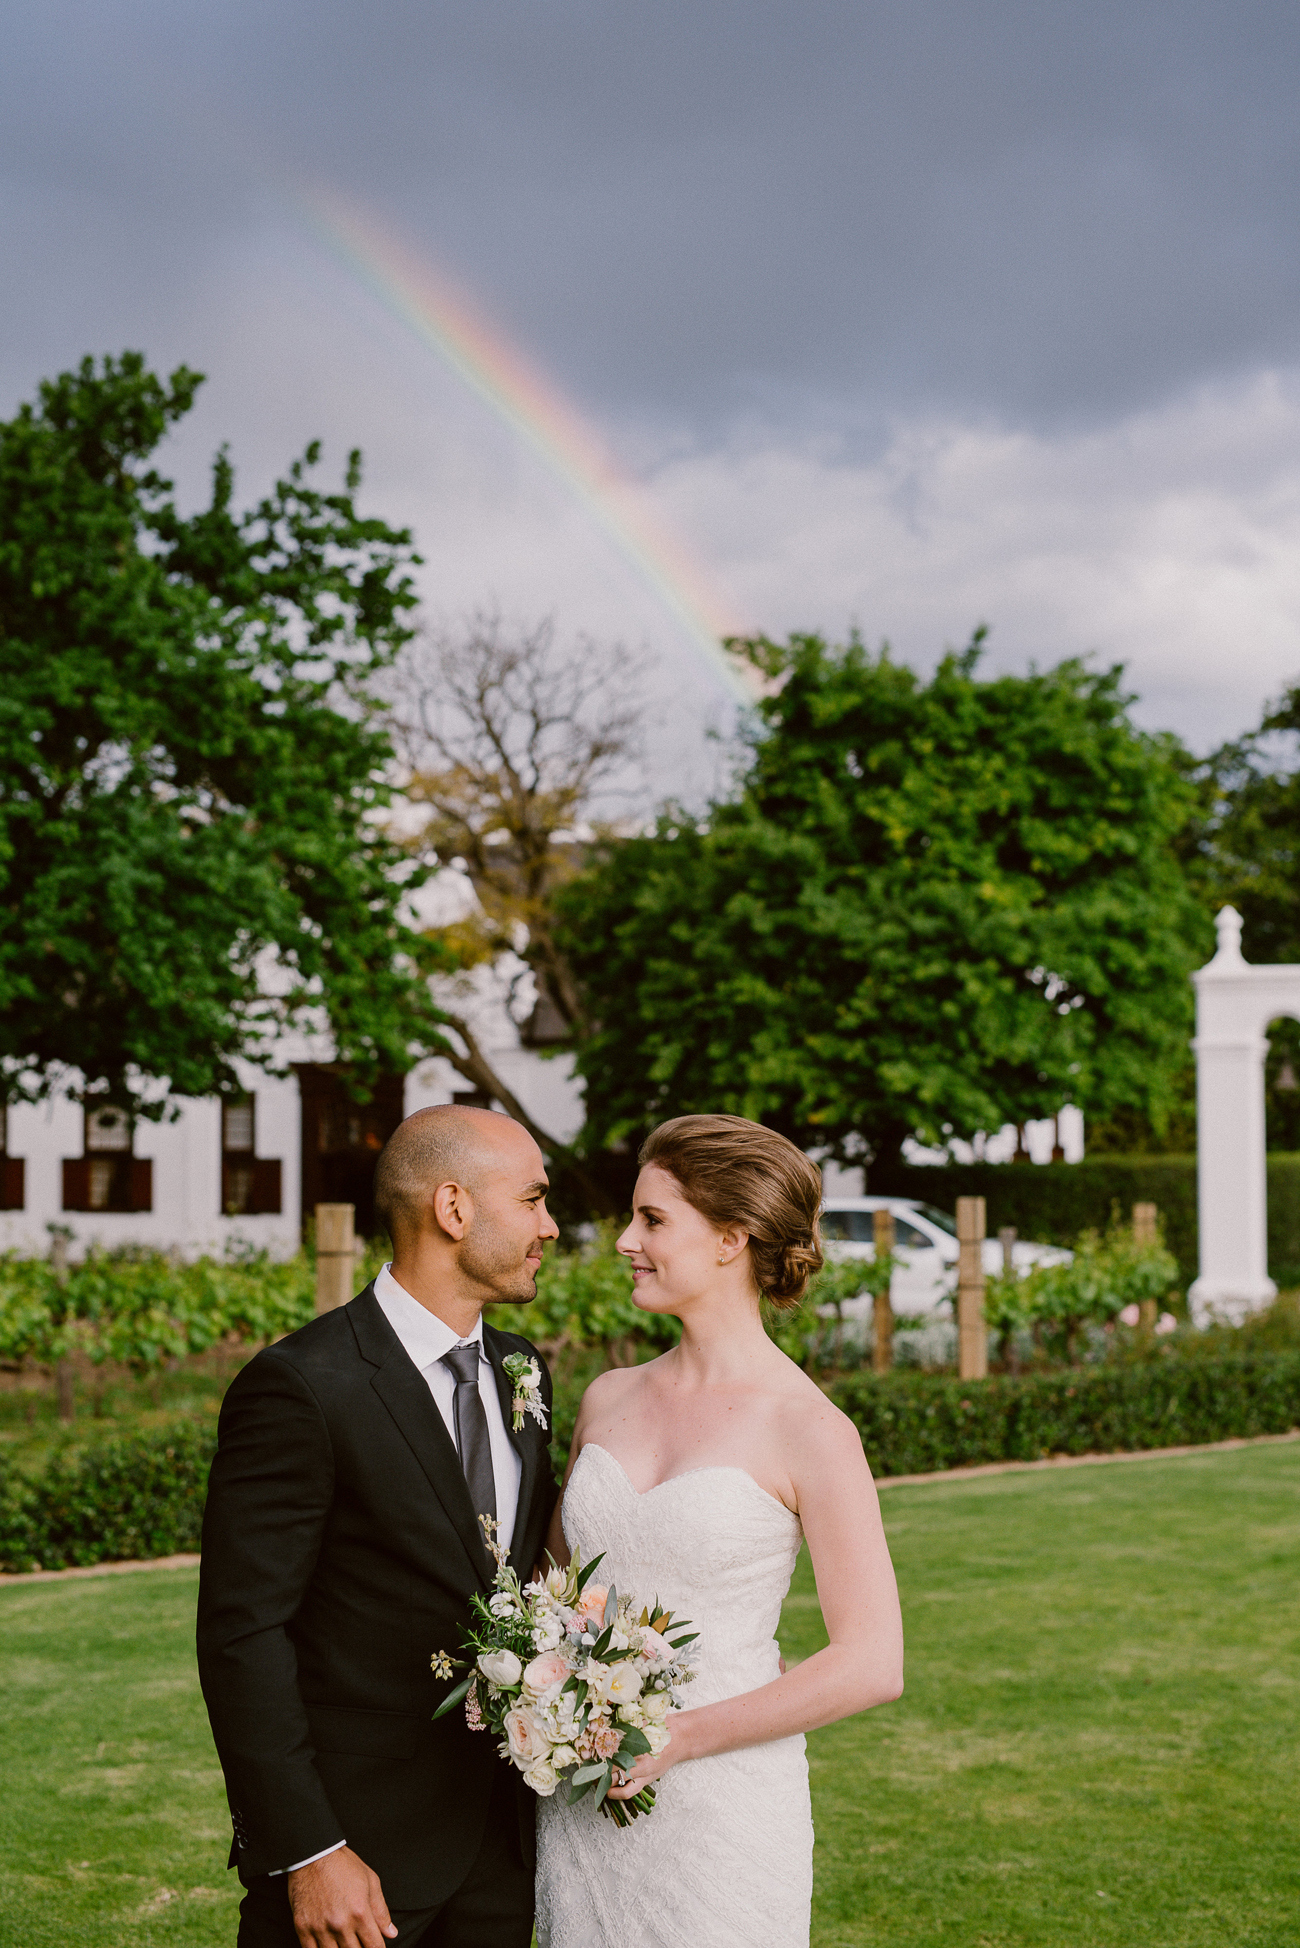 Bride and Groom with Rainbow | Image: Lad & Lass Photography